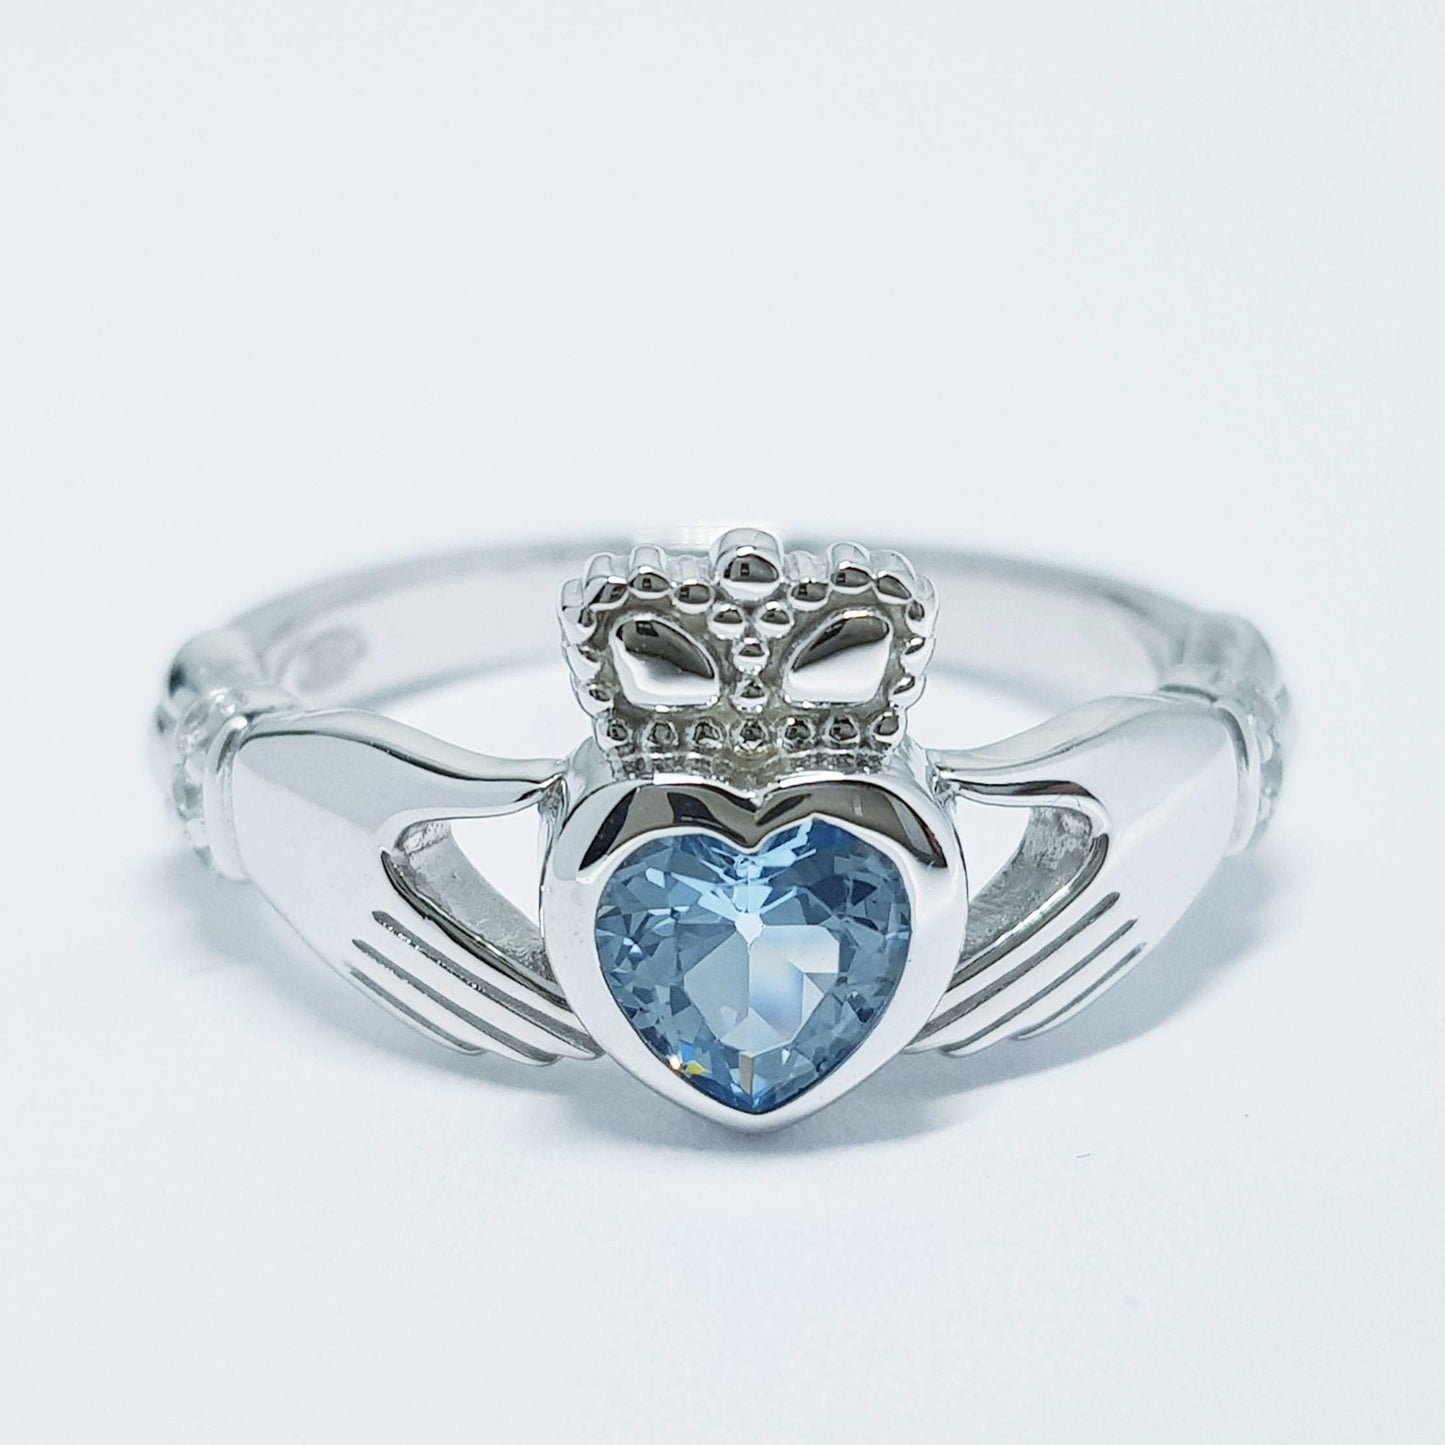 Sterling Silver Claddagh ring set with aquamarine blue heart shaped stone, Irish claddagh rings